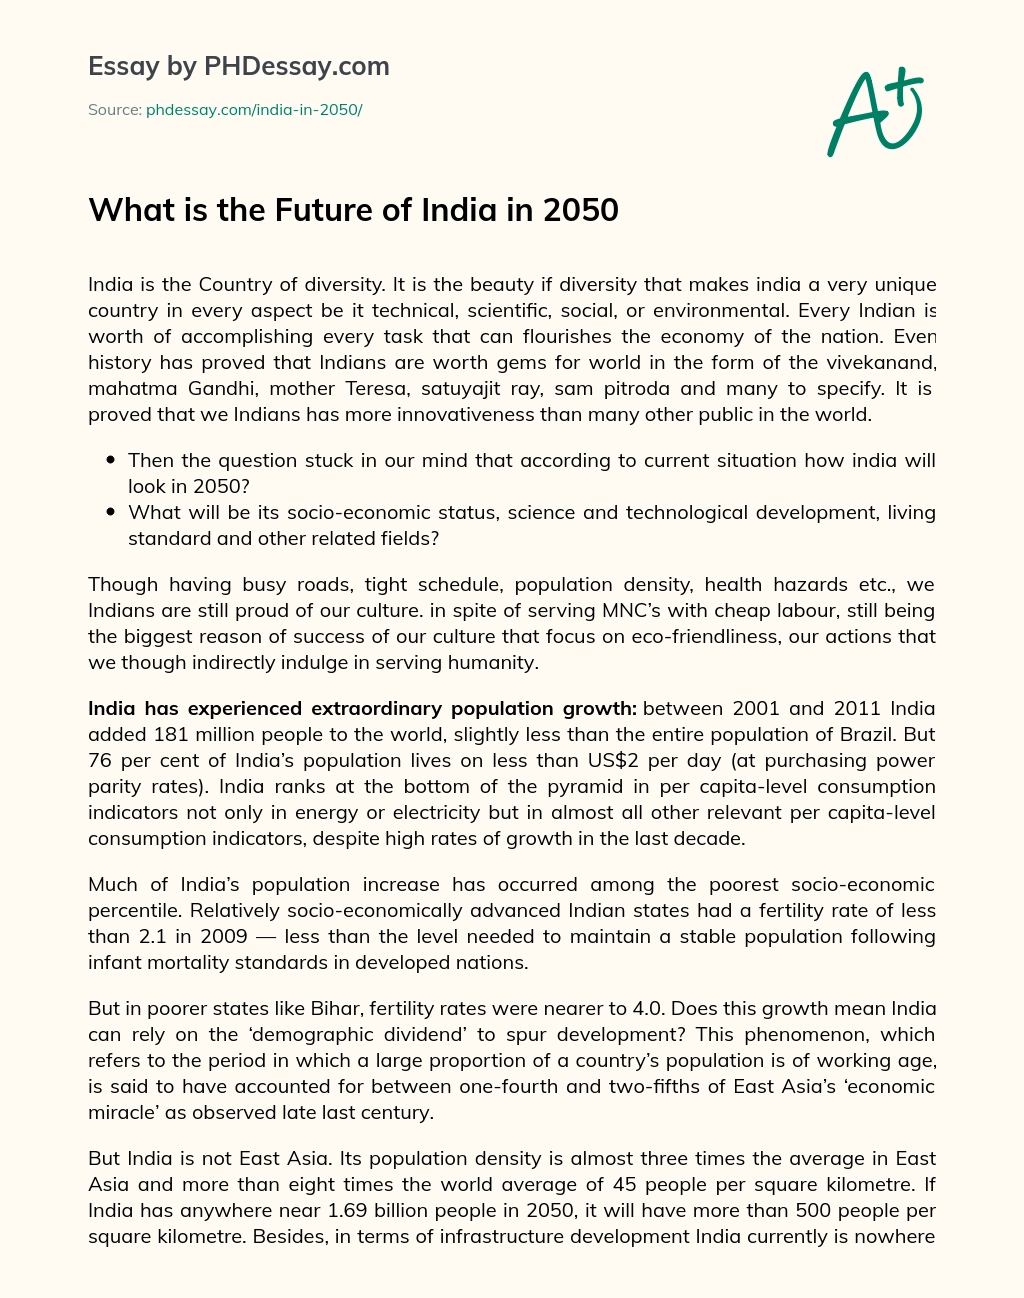 What is the Future of India in 2050 essay